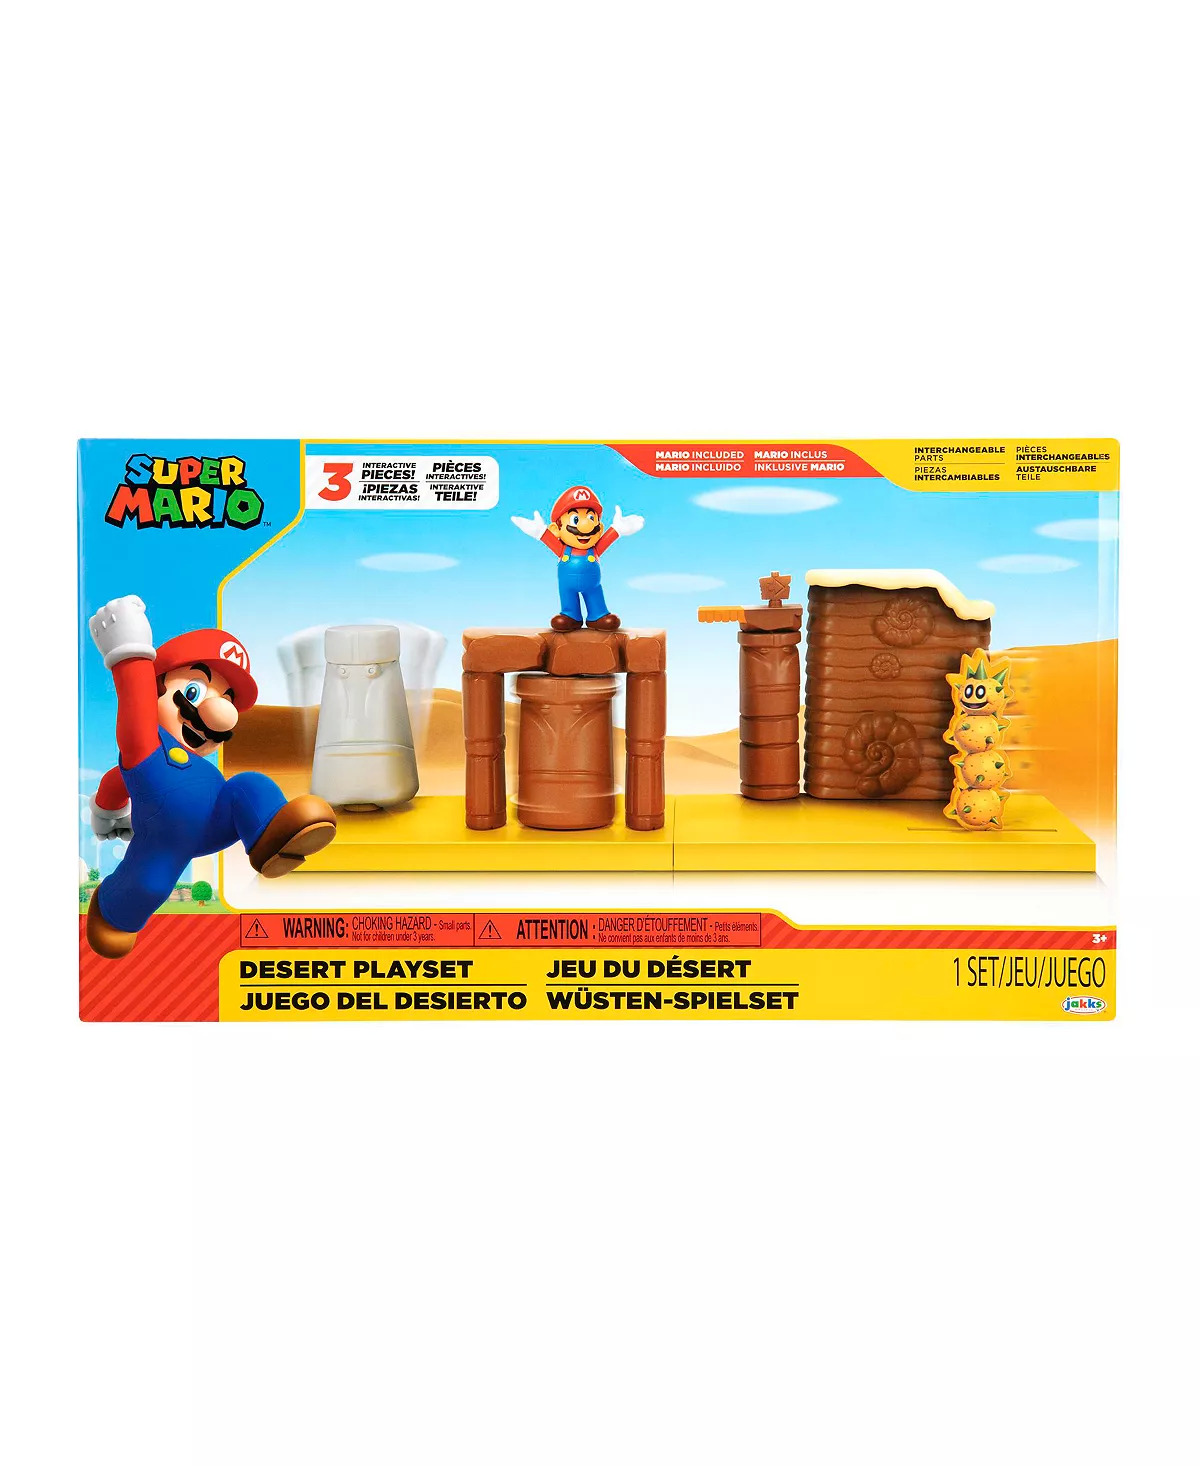 Super Mario Nintendo Diorama Playset: Cloud World, Acorn Plains & More $7.95 Each + Free Store Pickup at Macy's or FS on $25+